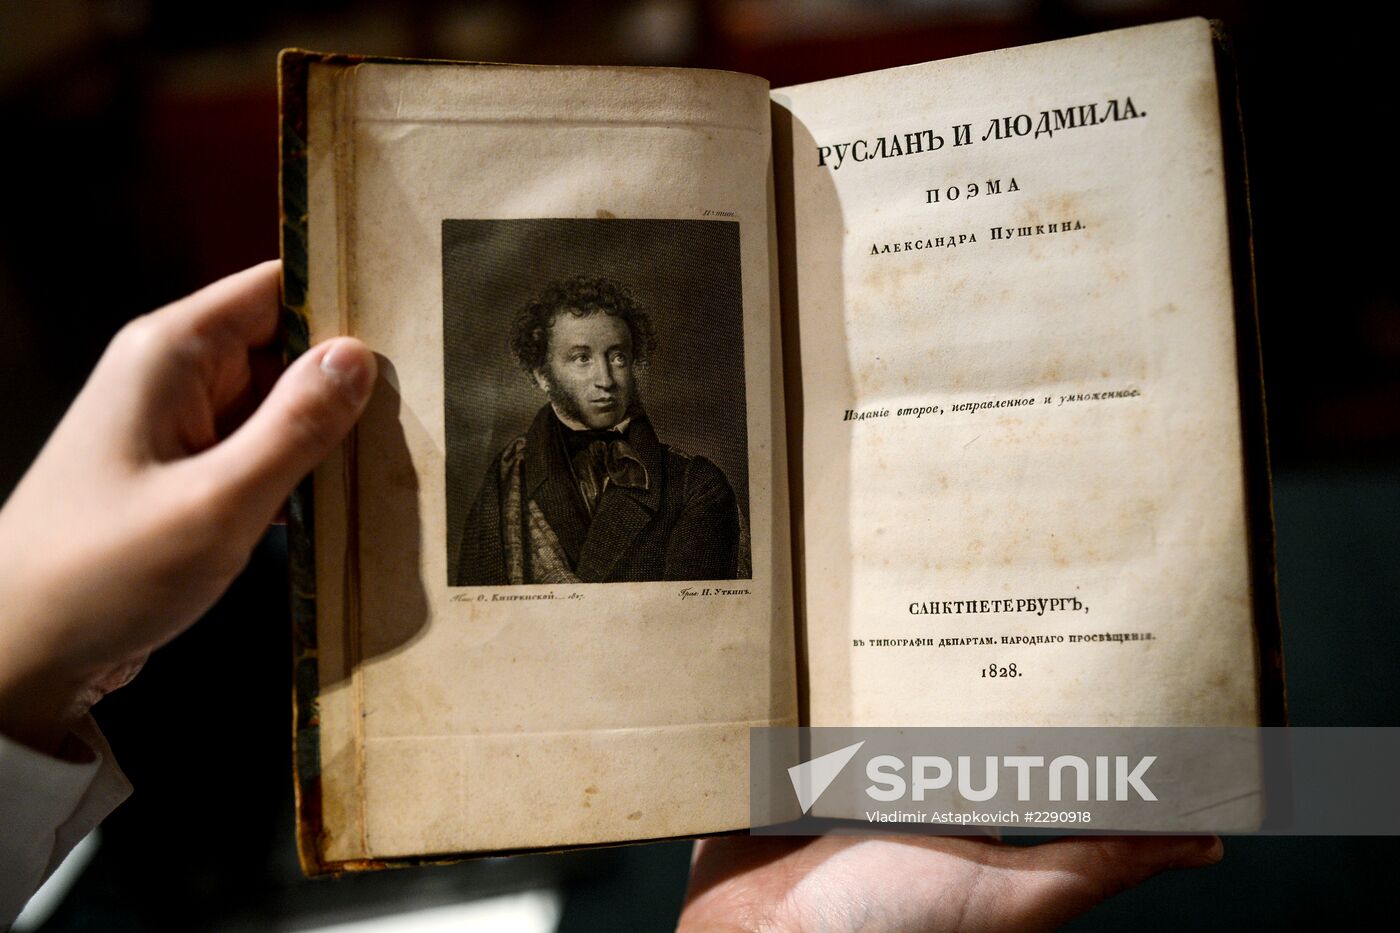 Top lots in "All Pushkin" auction